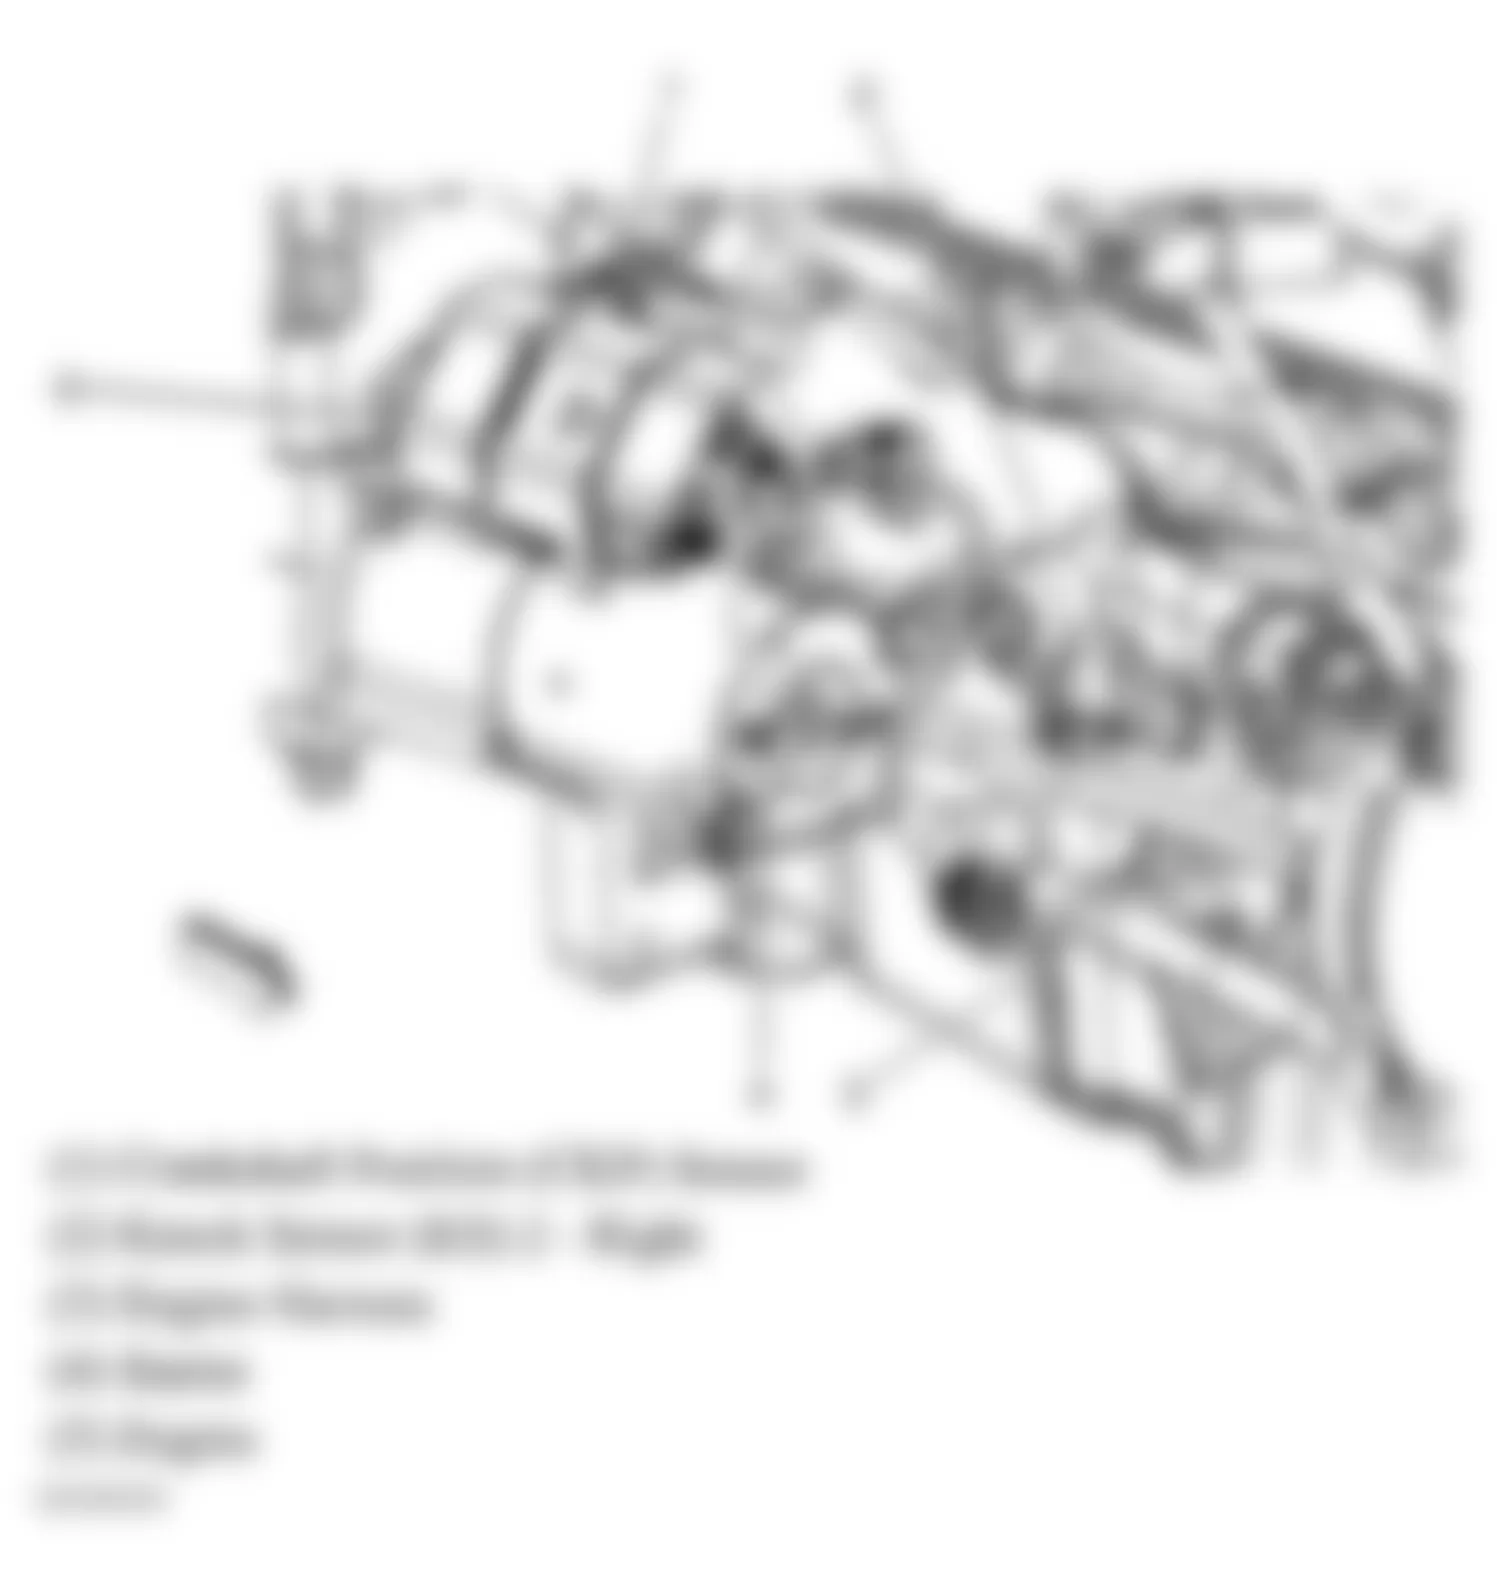 GMC Envoy XL 2006 - Component Locations -  Lower Right Rear Of Engine (5.3L/6.0L)